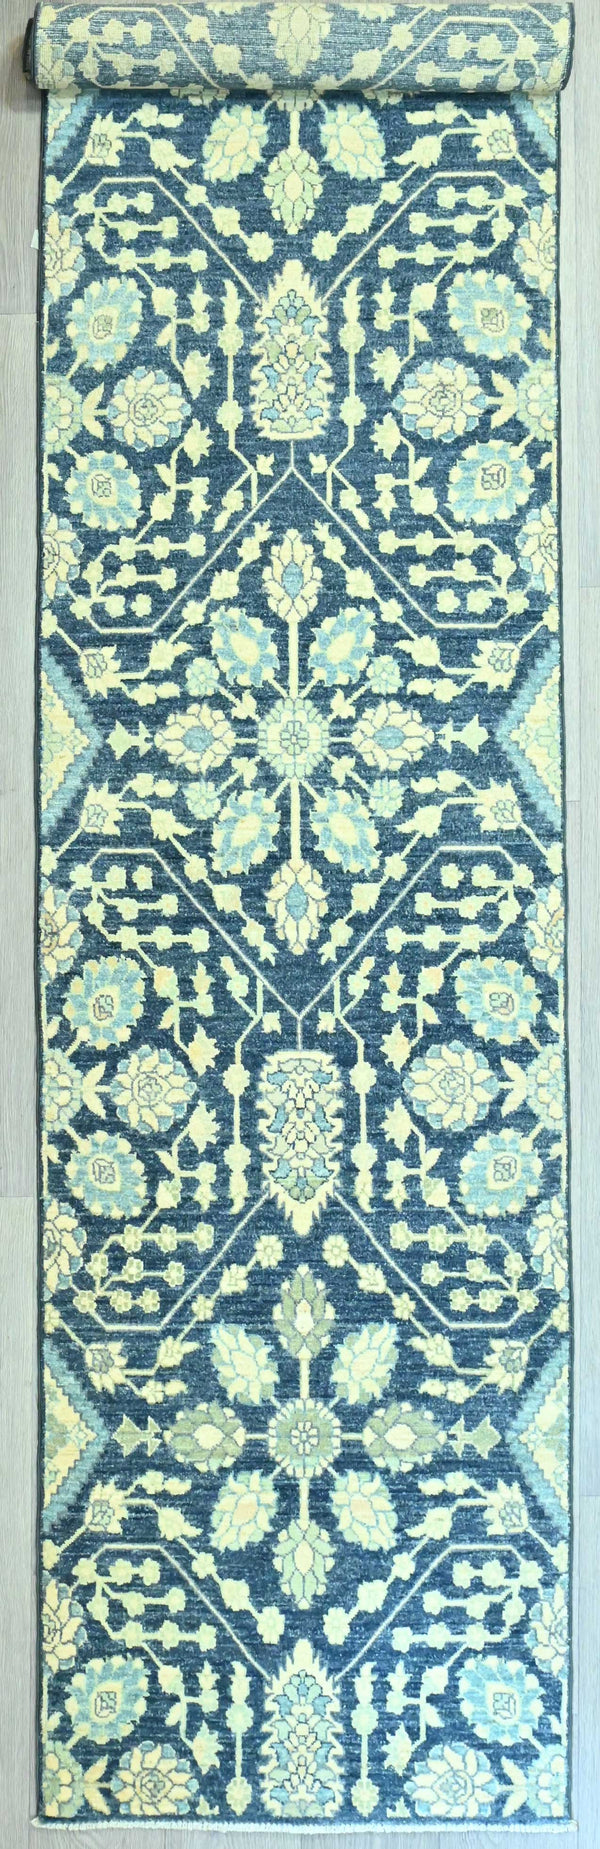 Handwoven Pure Wool Chobi Runner with Floral Design and Blue Tones - (318H x 75W)